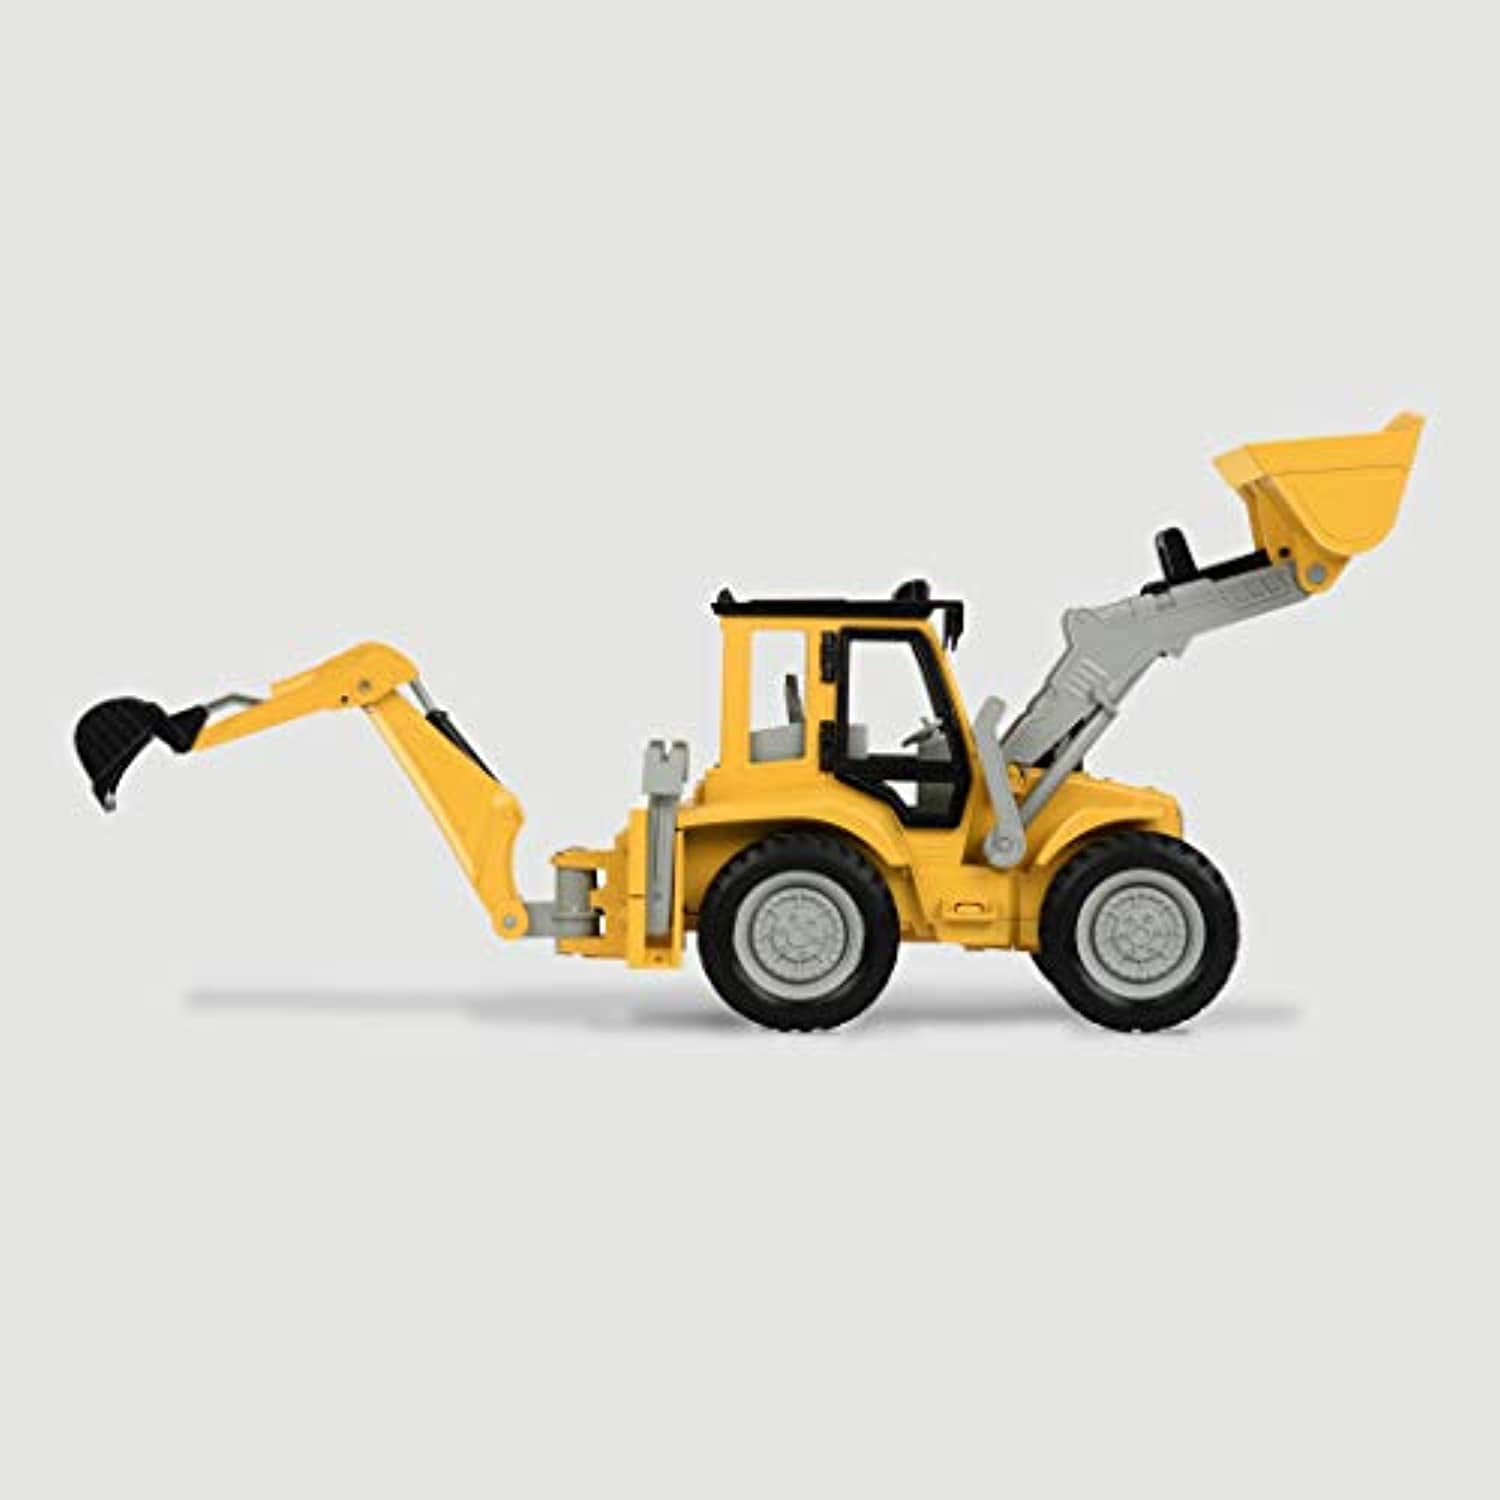 Driven Backhoe Toy Loader With Sound Effects by Battat for sale online 